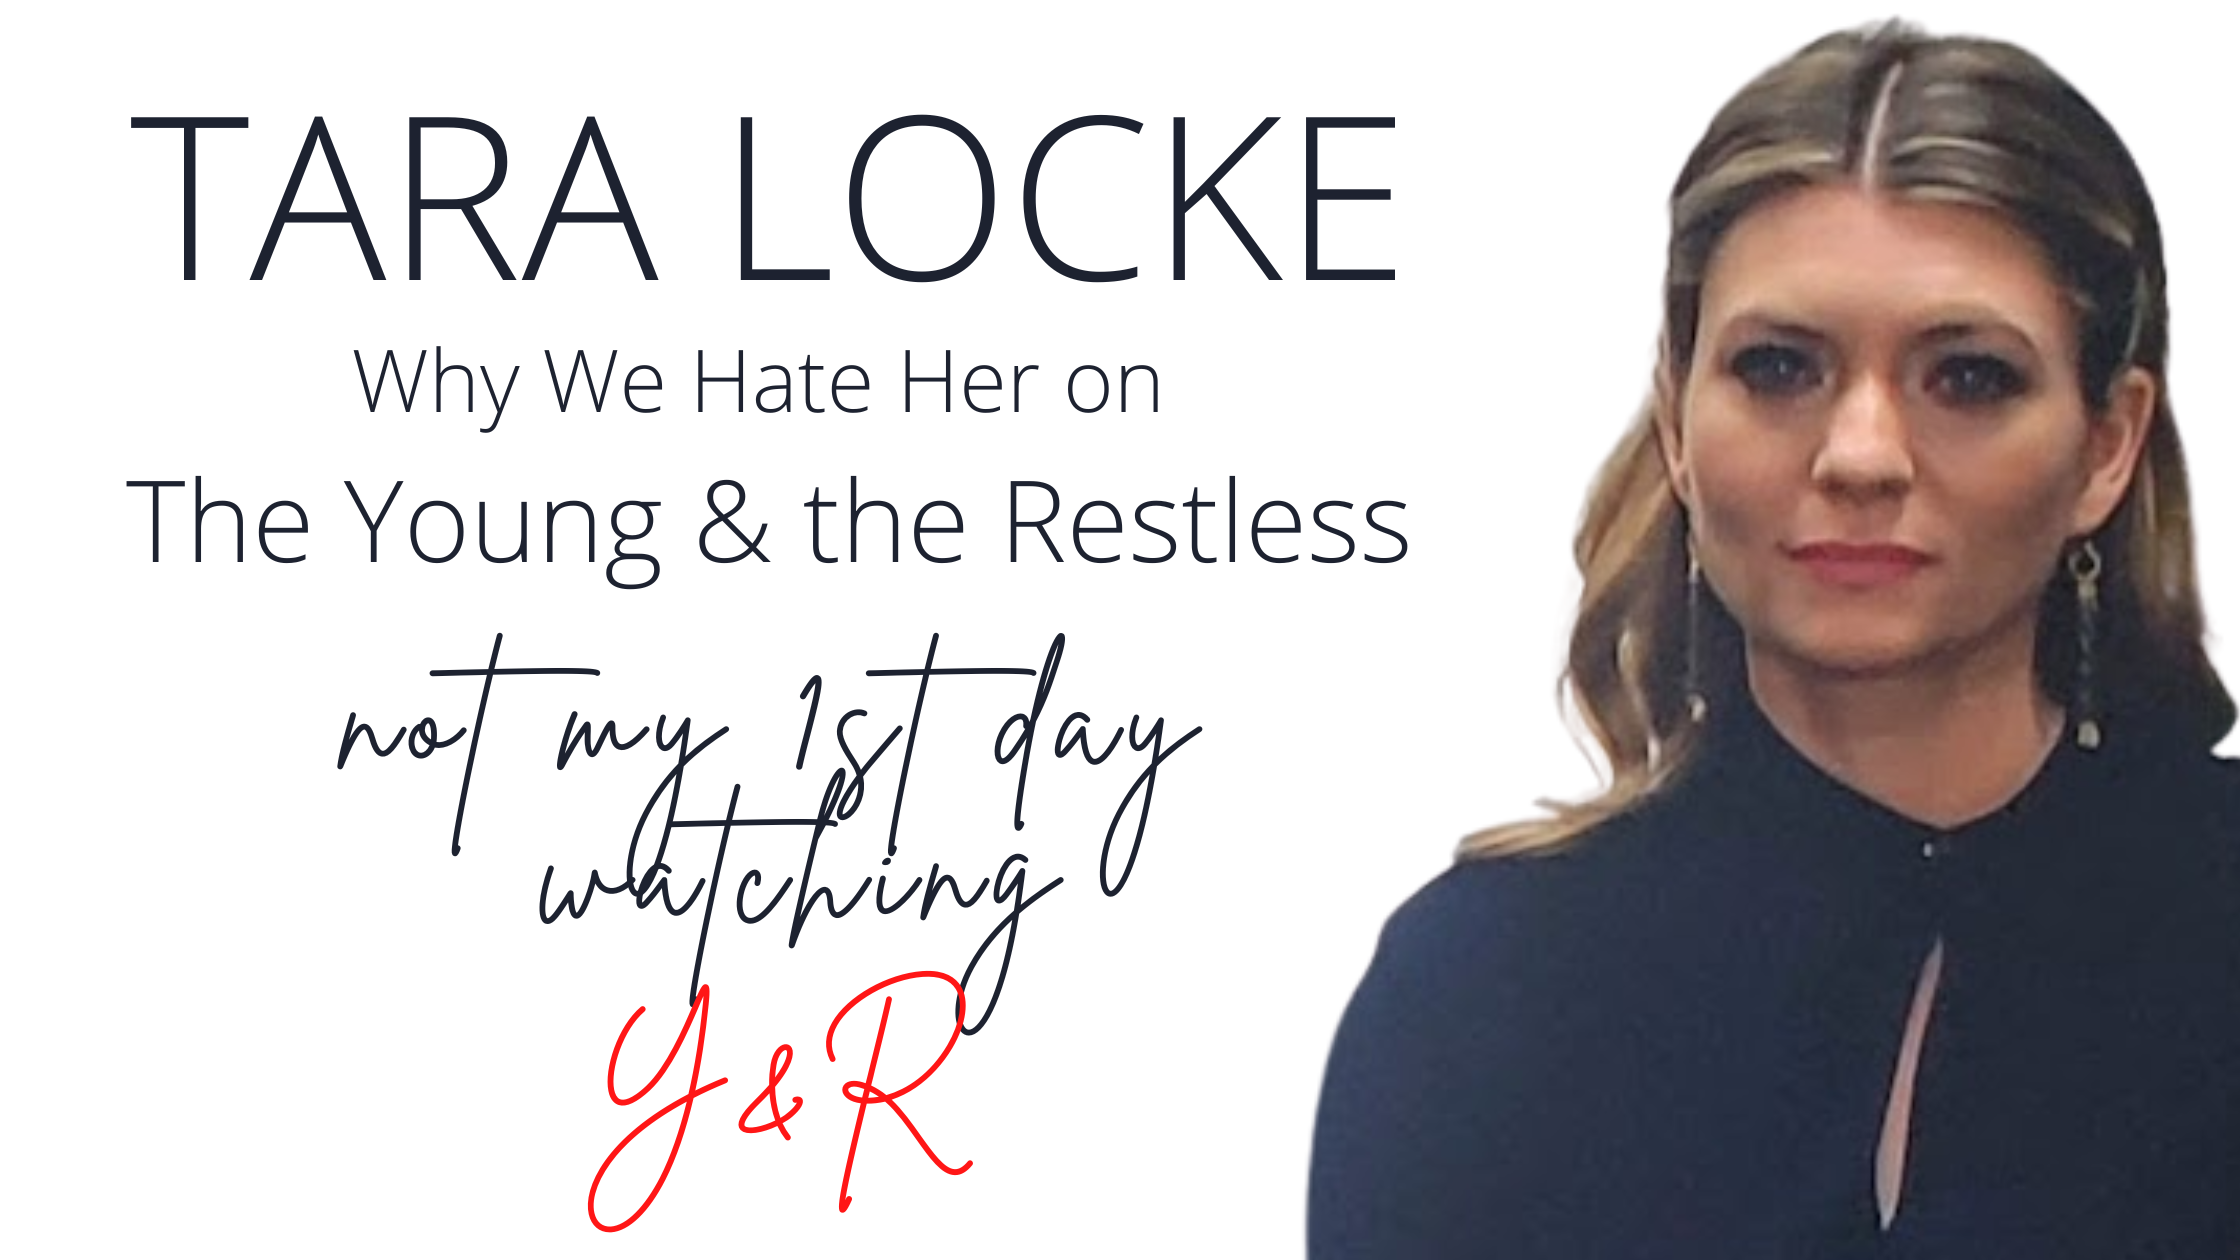 Why We Hate Tara Locke on The Young & the Resetless